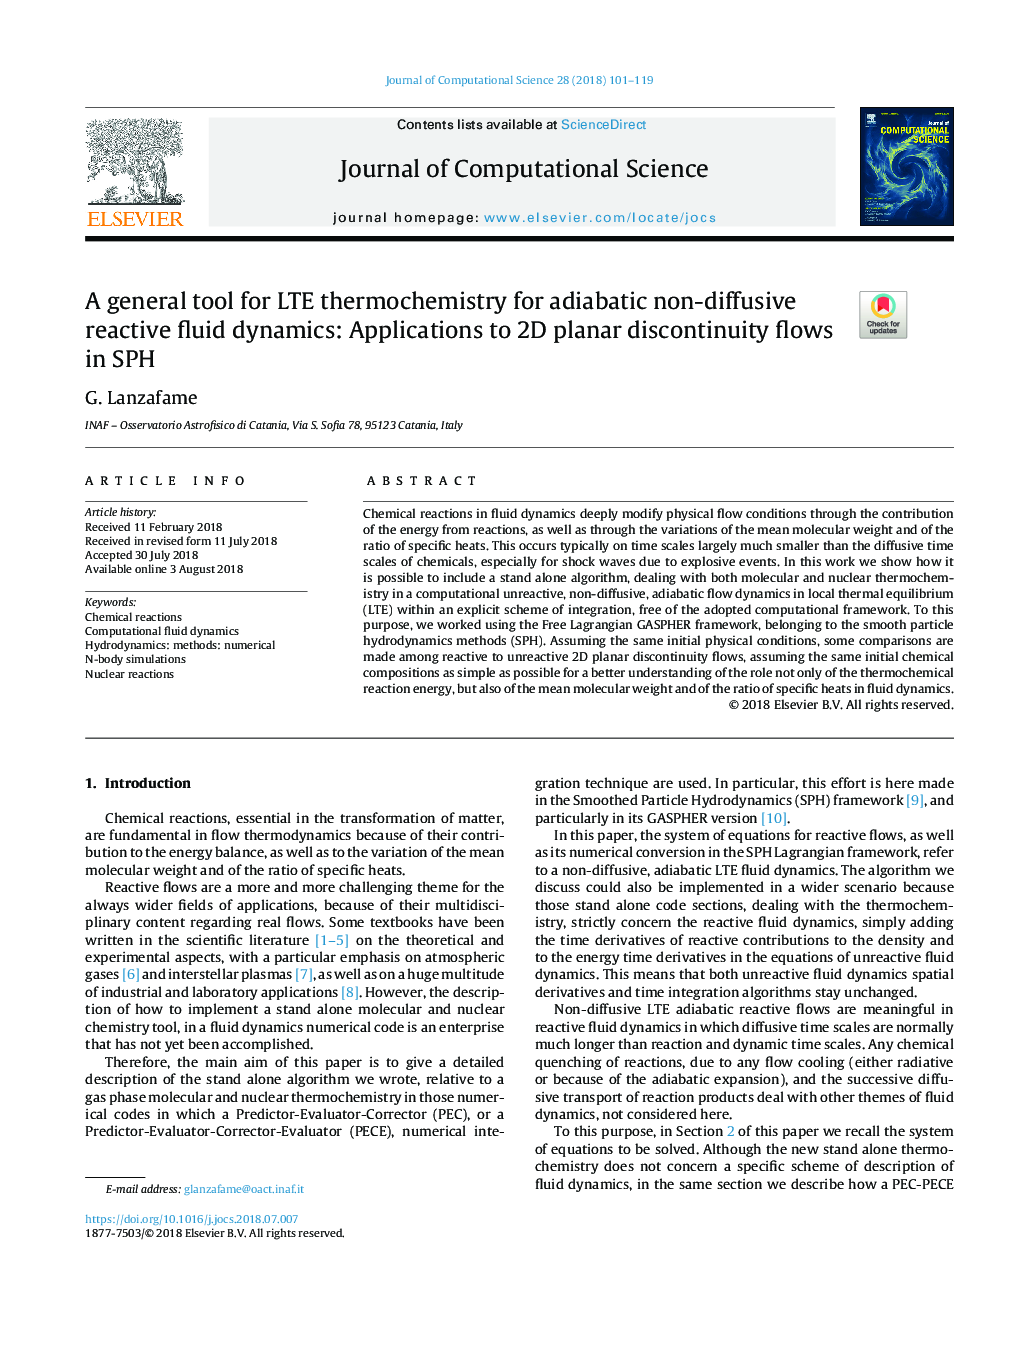 A general tool for LTE thermochemistry for adiabatic non-diffusive reactive fluid dynamics: Applications to 2D planar discontinuity flows in SPH